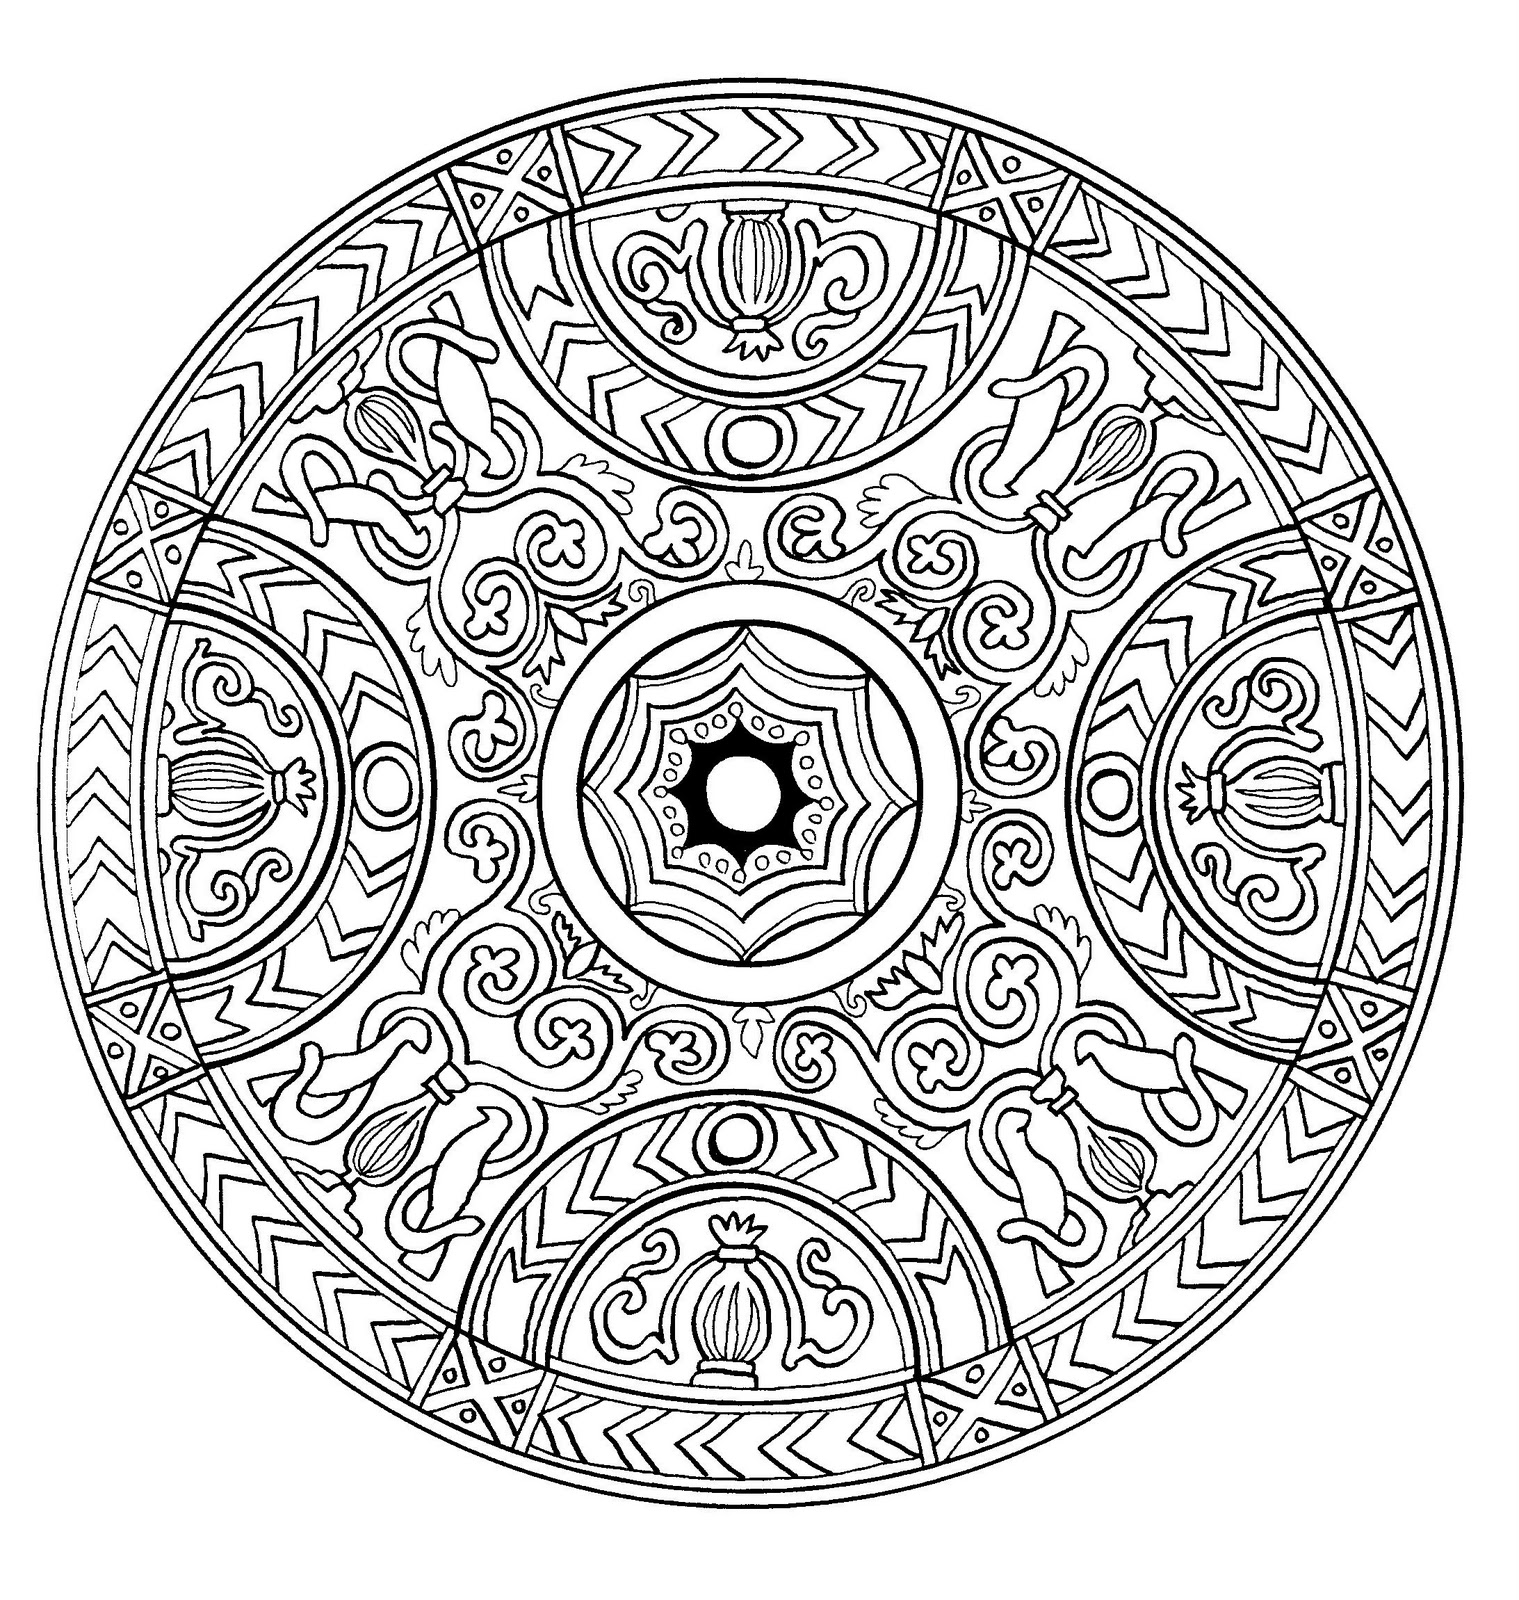 Like an ornament in a French castle ... Very royal Mandala template !